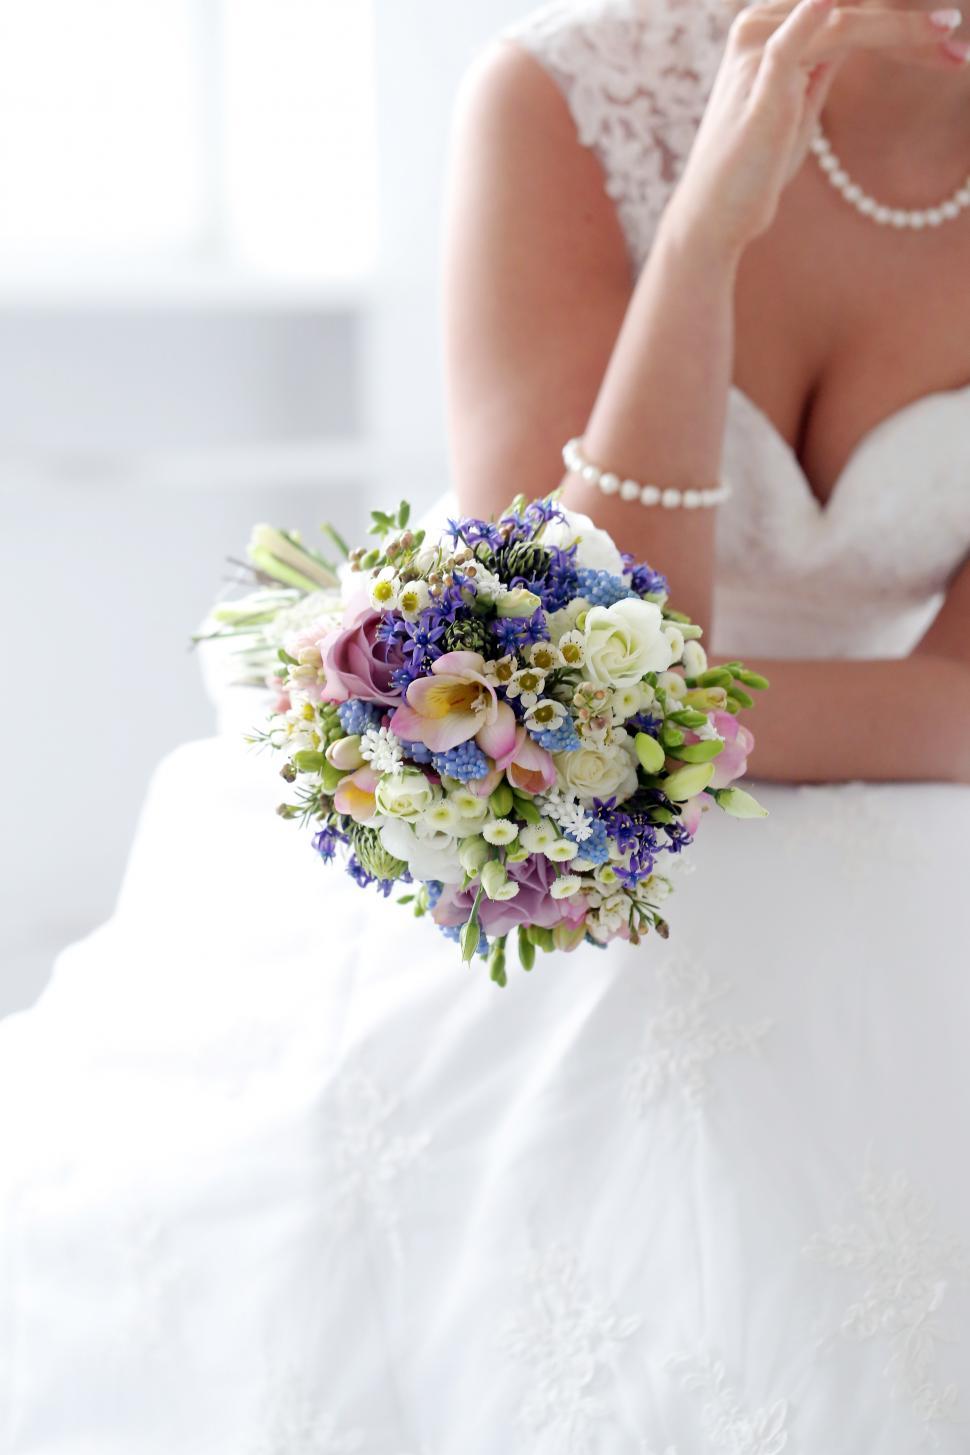 Free Image of Wedding. Beautiful bride in dress with flower bouquet 